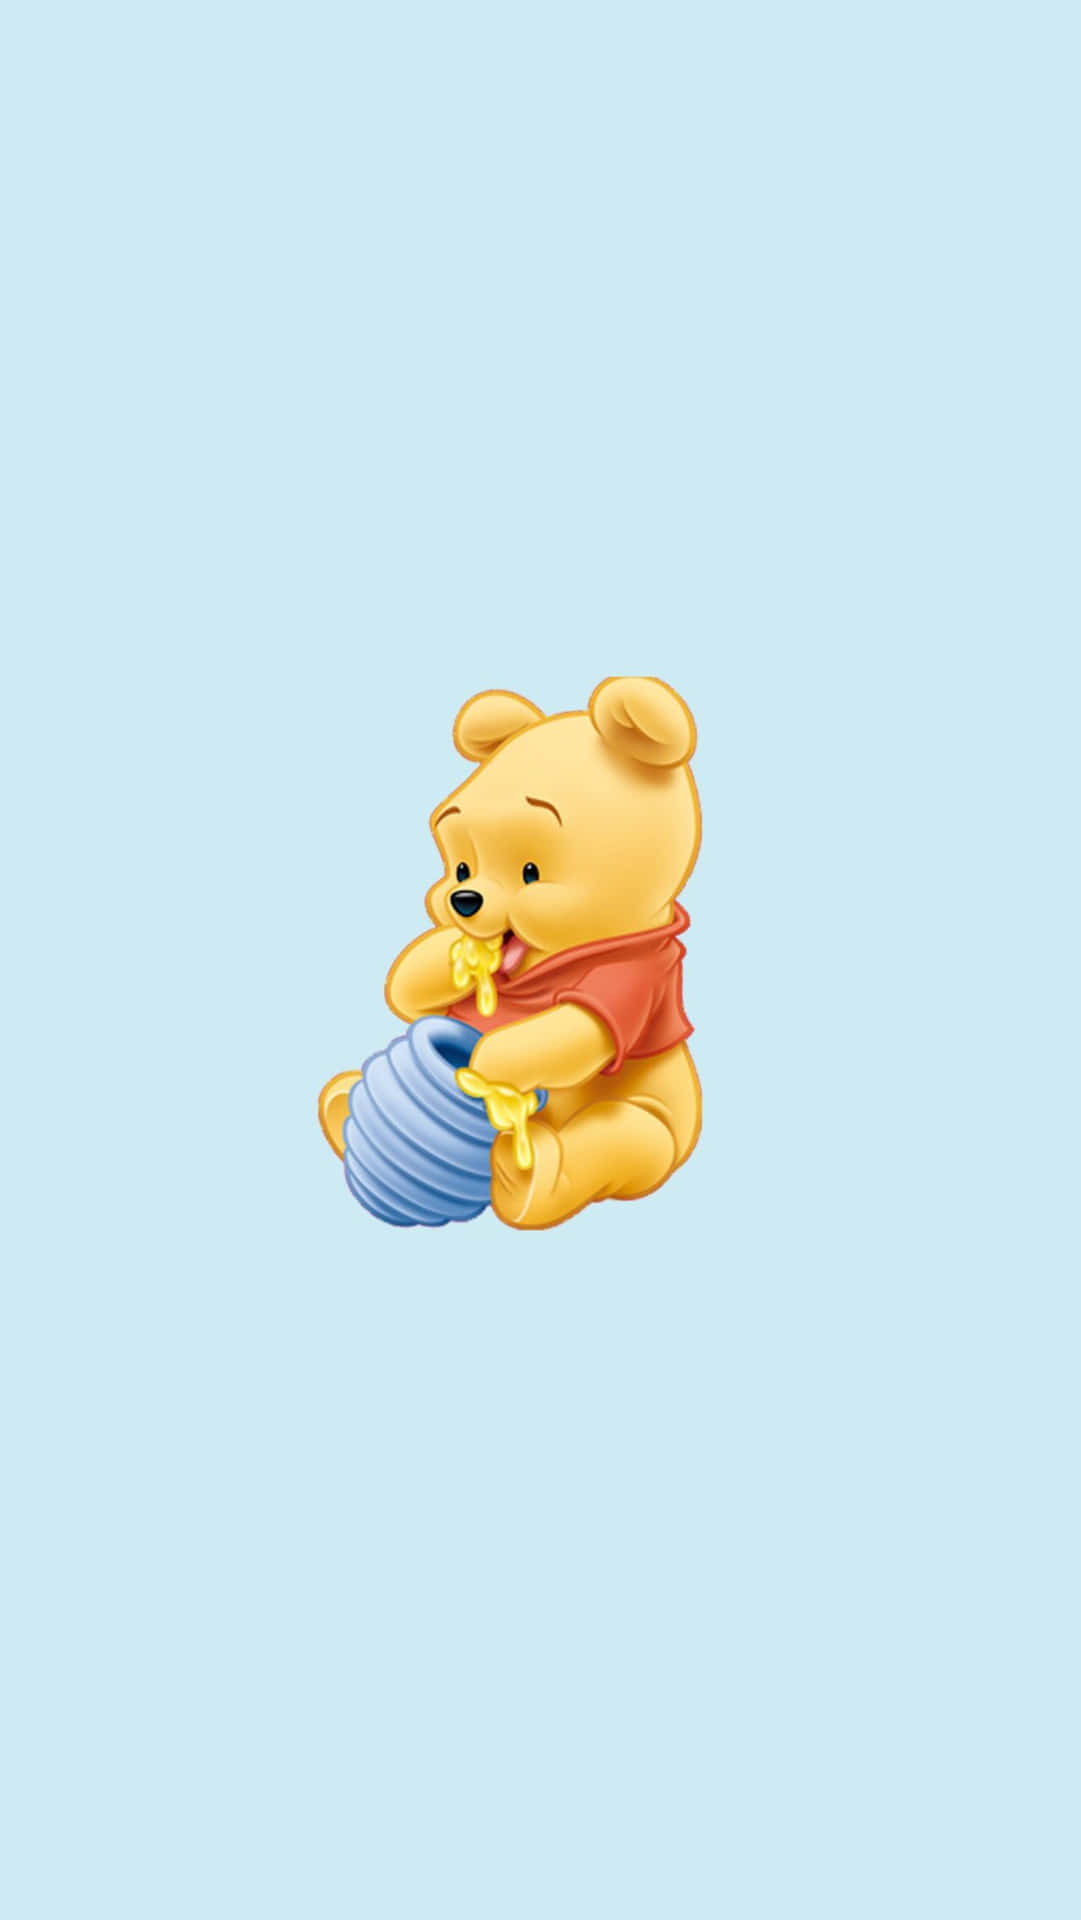 100+] Winnie The Pooh Aesthetic Pictures